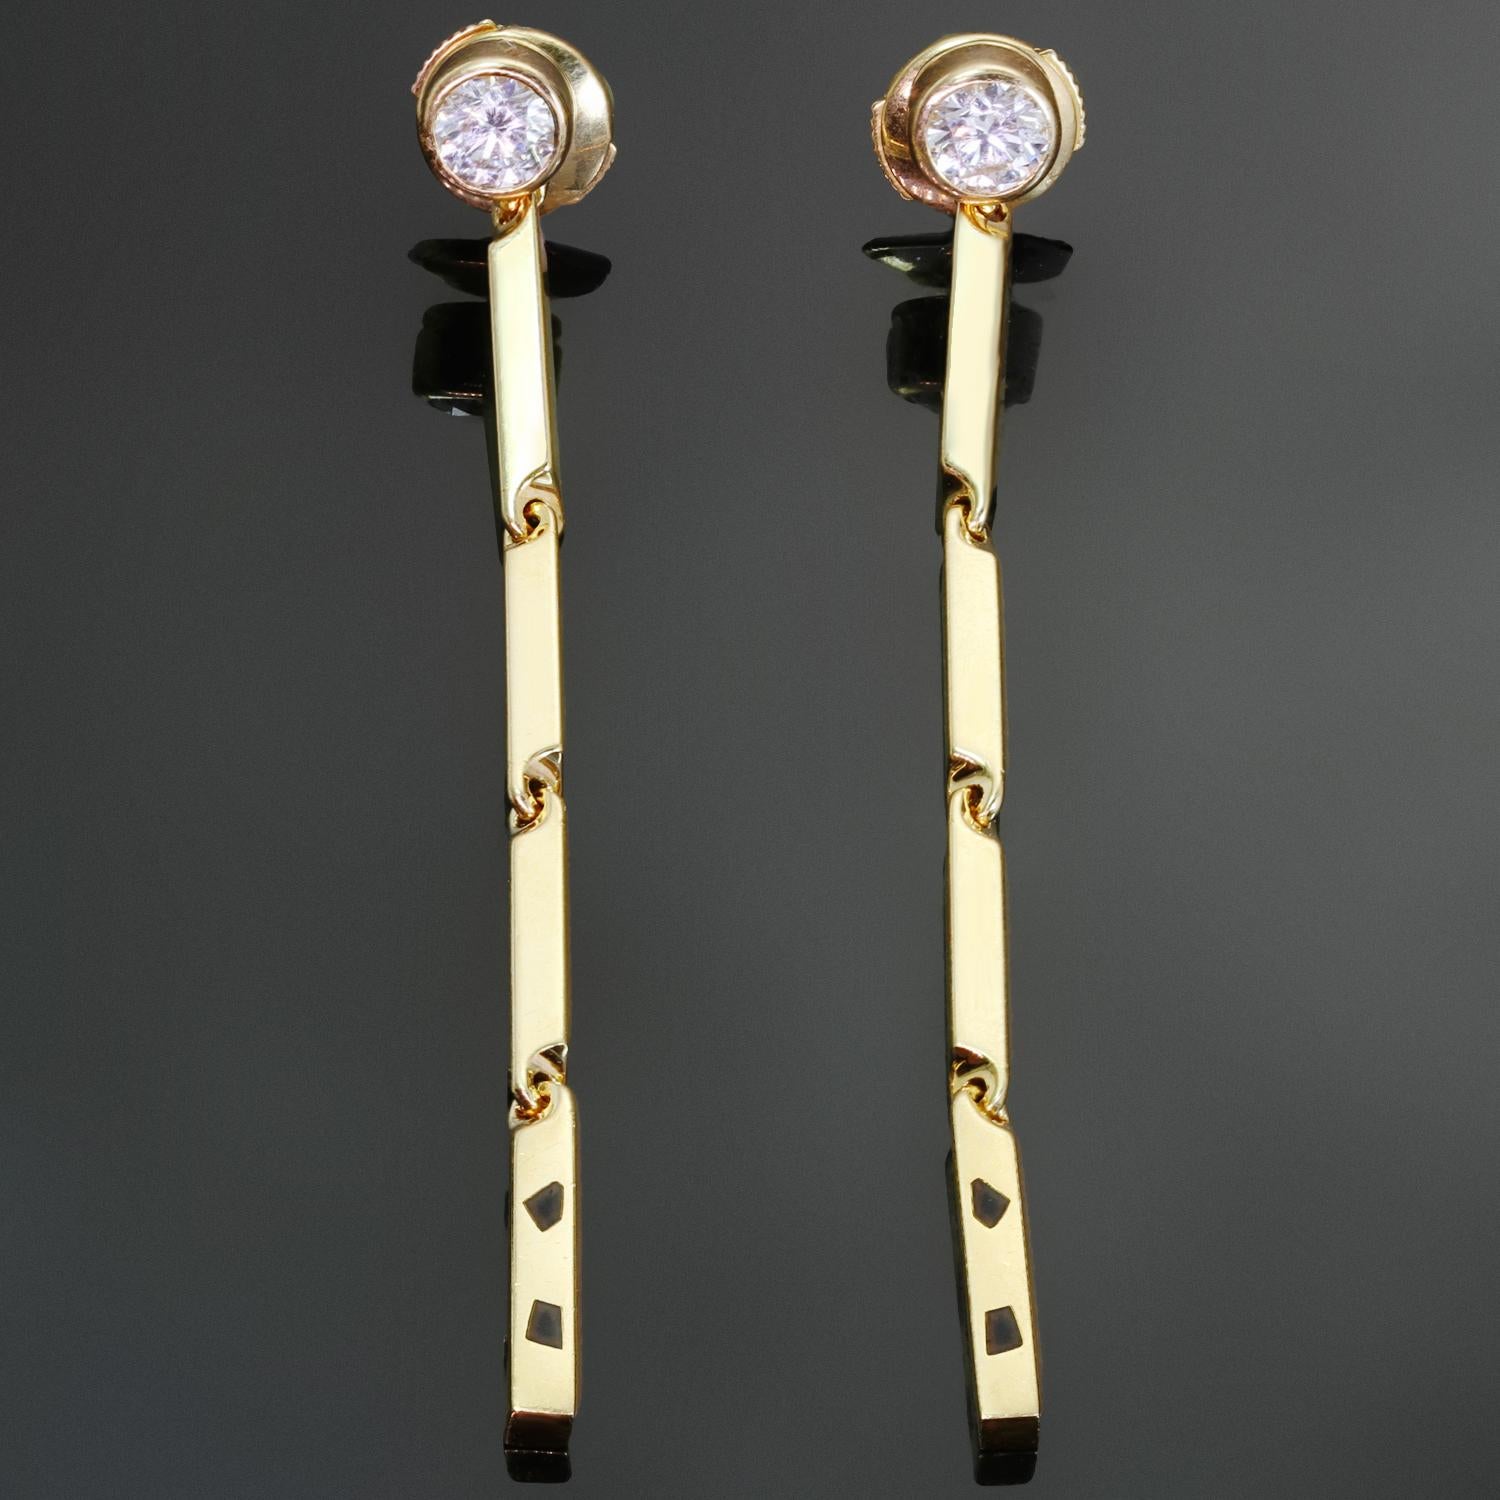 These fabulous Cartier drop earrings from the chic Panthere collection are crafted in 18k yellow gold, set with round brilliant D-E-F VVS1-VVS2 diamonds weighing an estimated 0.60 carats and accented with black lacquer. Made in France circa 2010s.